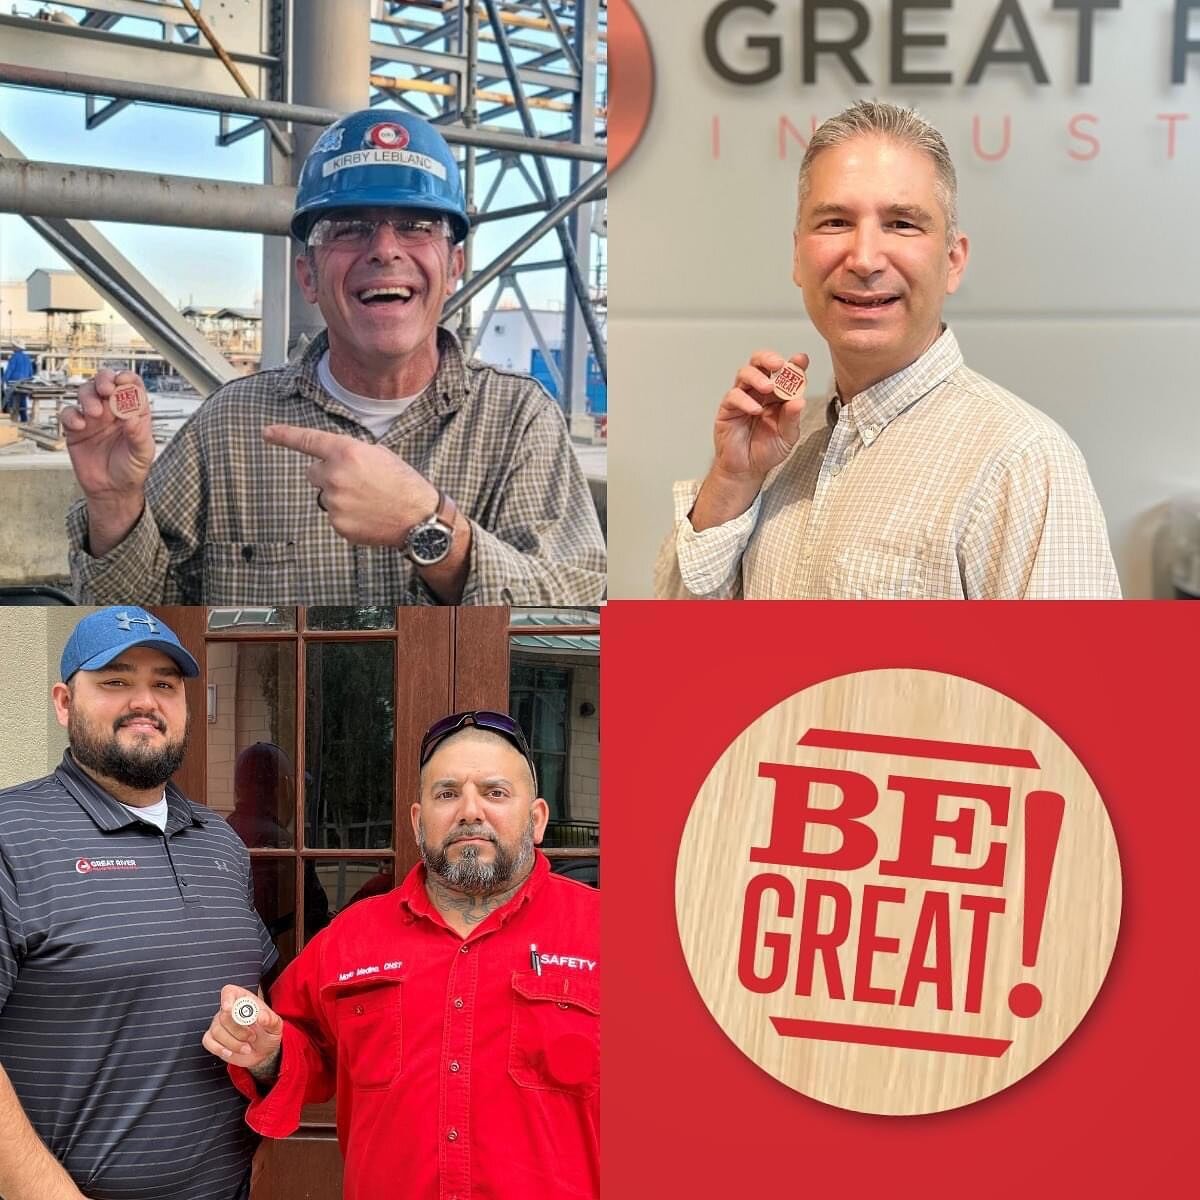 At GRI this is what it looks like to &ldquo;BE GREAT&rdquo;! 

The &ldquo;BE GREAT&rdquo; culture is achieved through actions of promoting a safe and healthful workplace and by displaying exemplary work performance and behaviors. When employees embra